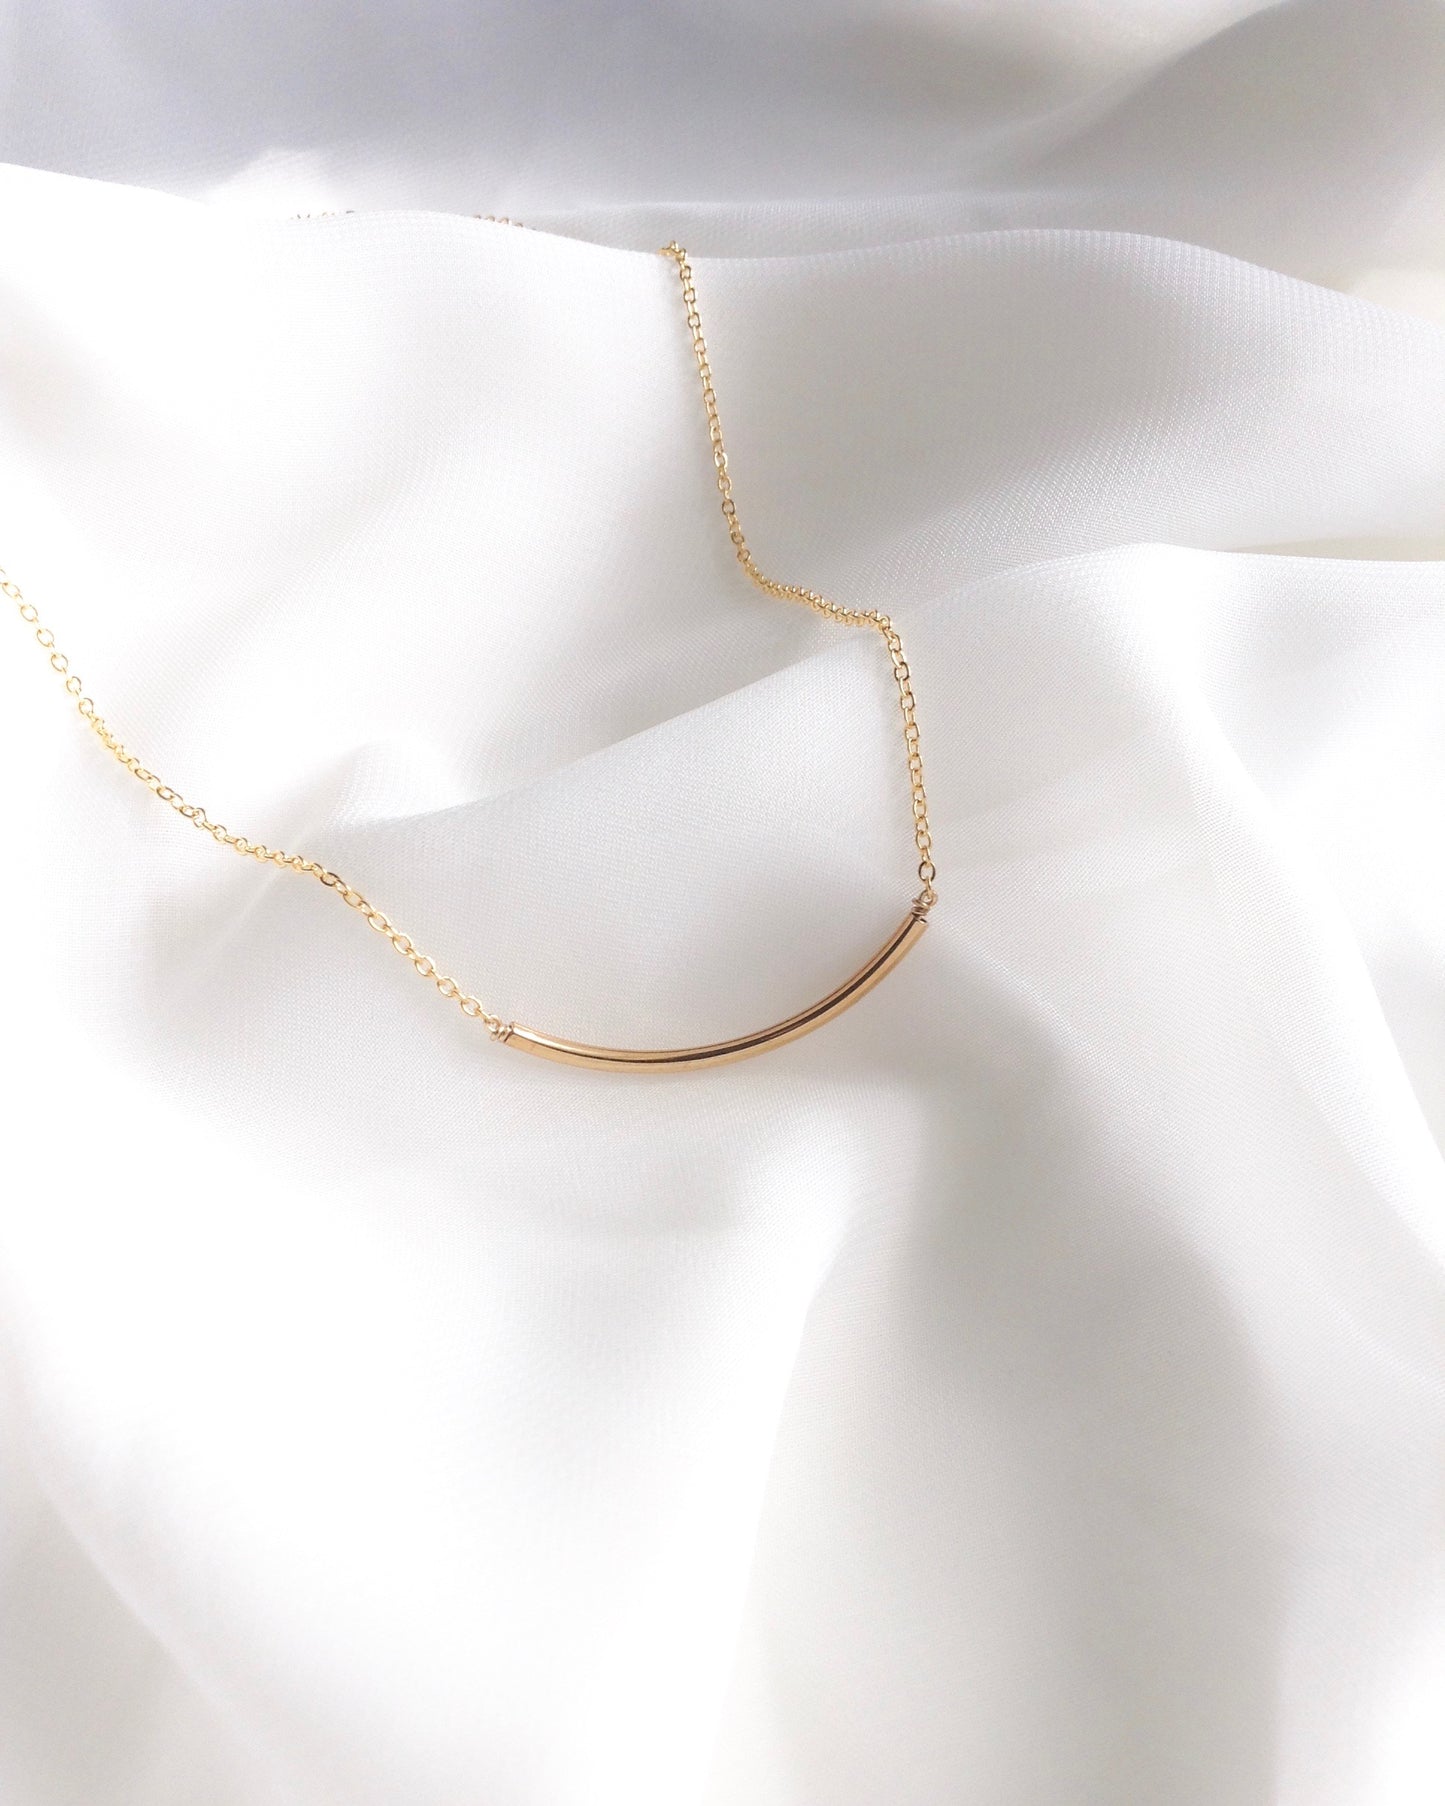 Curved Bar Necklace | Slim Bar Necklace in Gold Filled or Sterling Silver | IB Jewelry